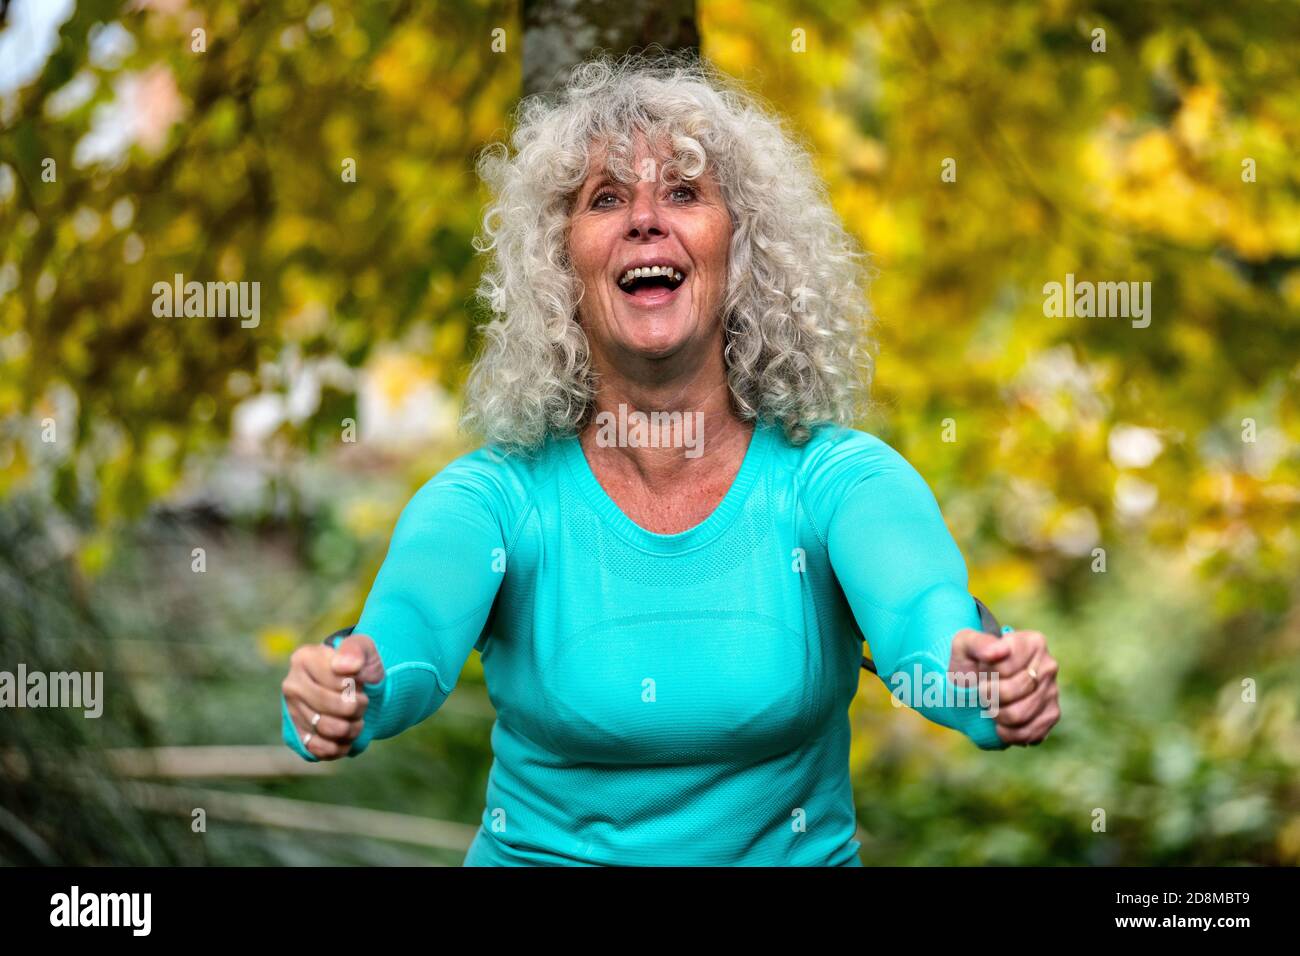 A woman in her sixties exercises outdoors with a resistance band in autumn. Stock Photo